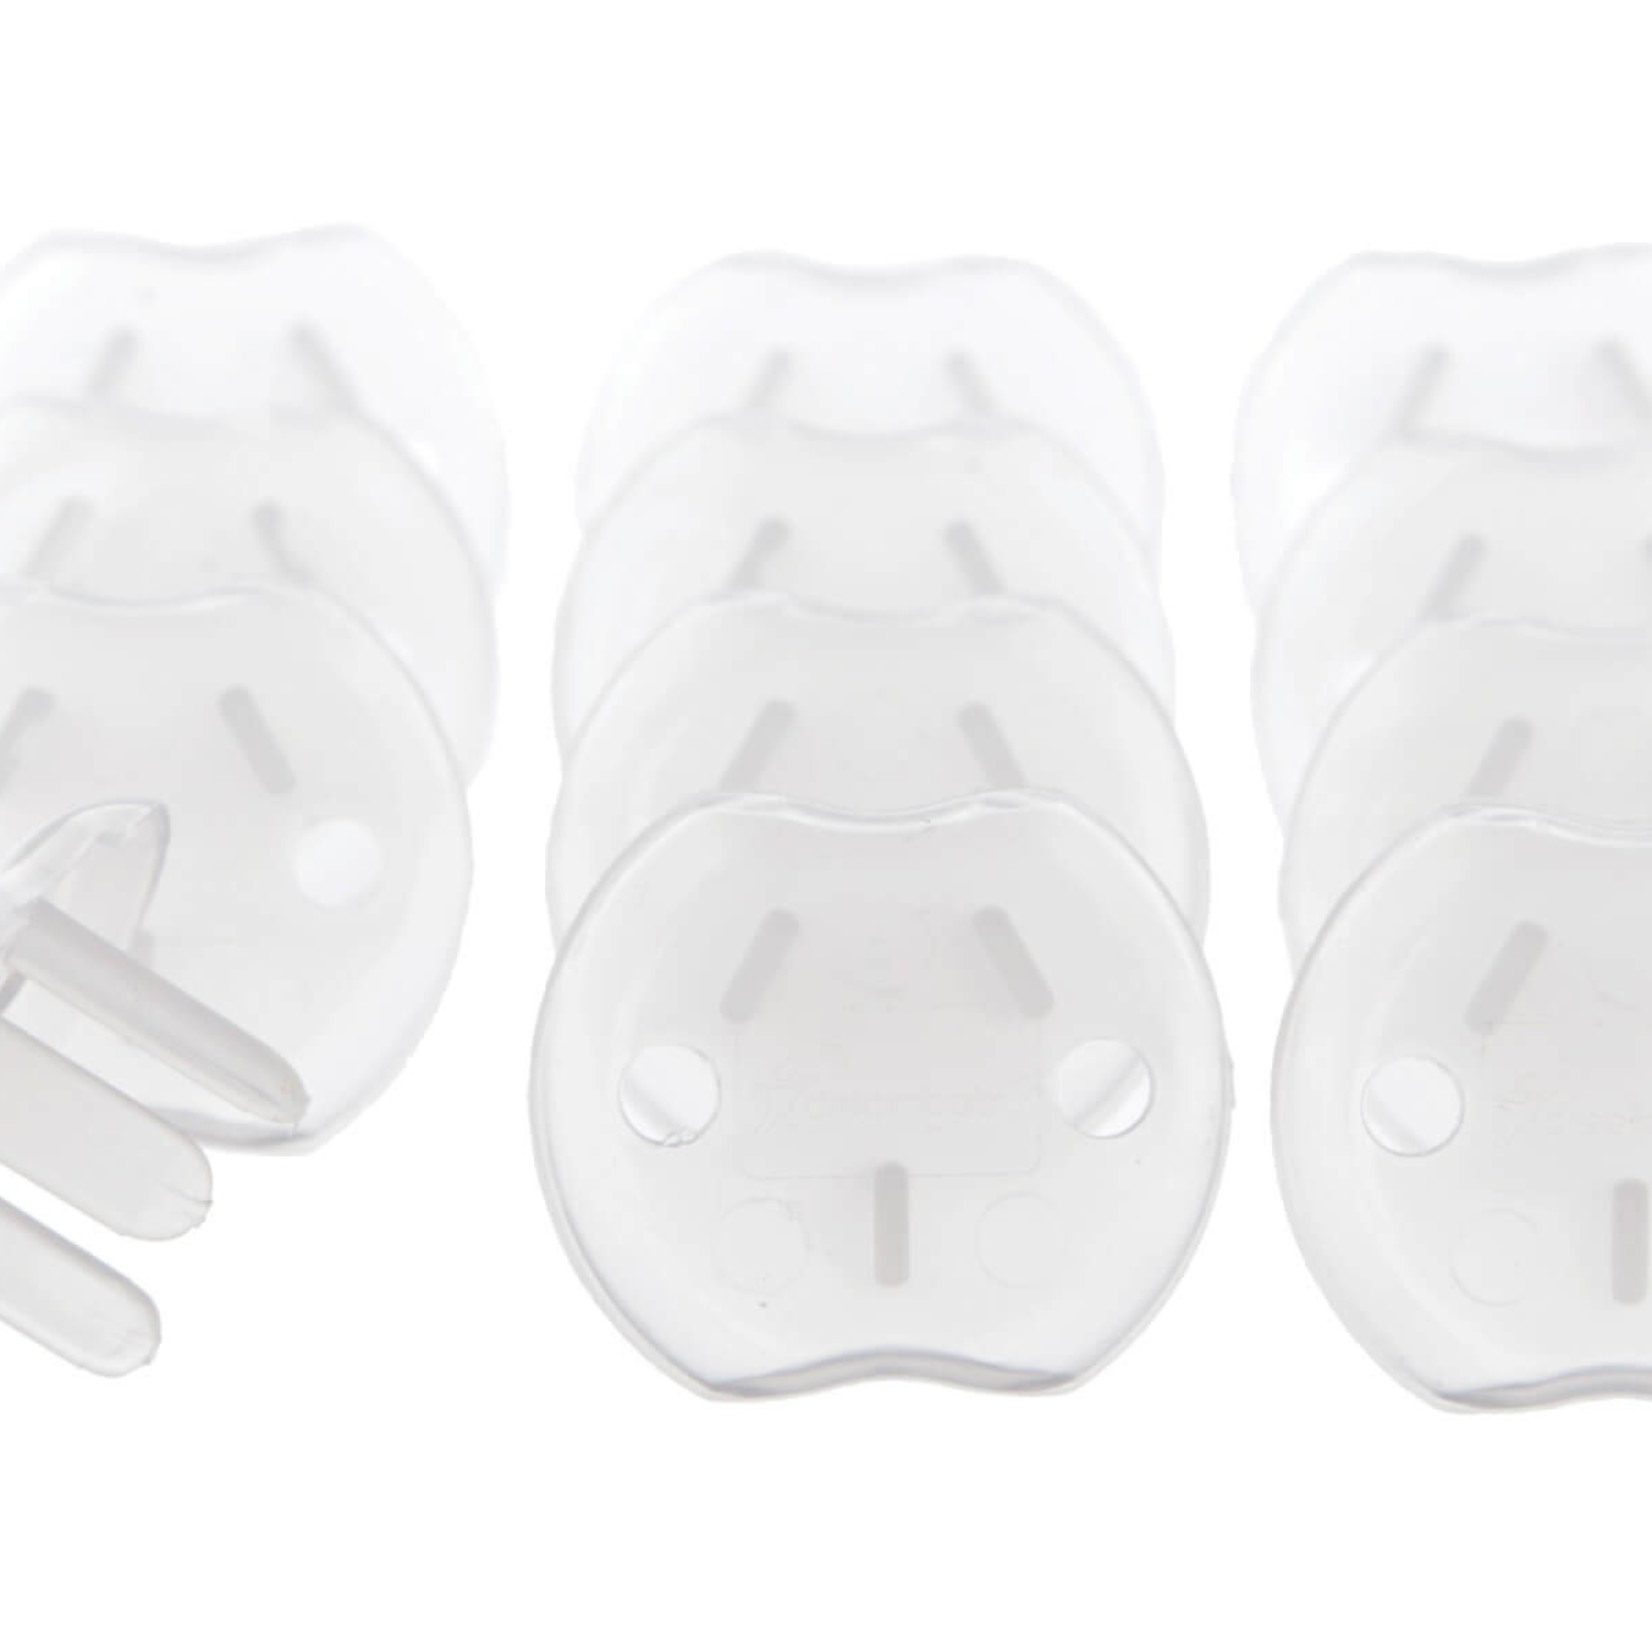 Dreambaby OUTLET PLUGS 12 PACK